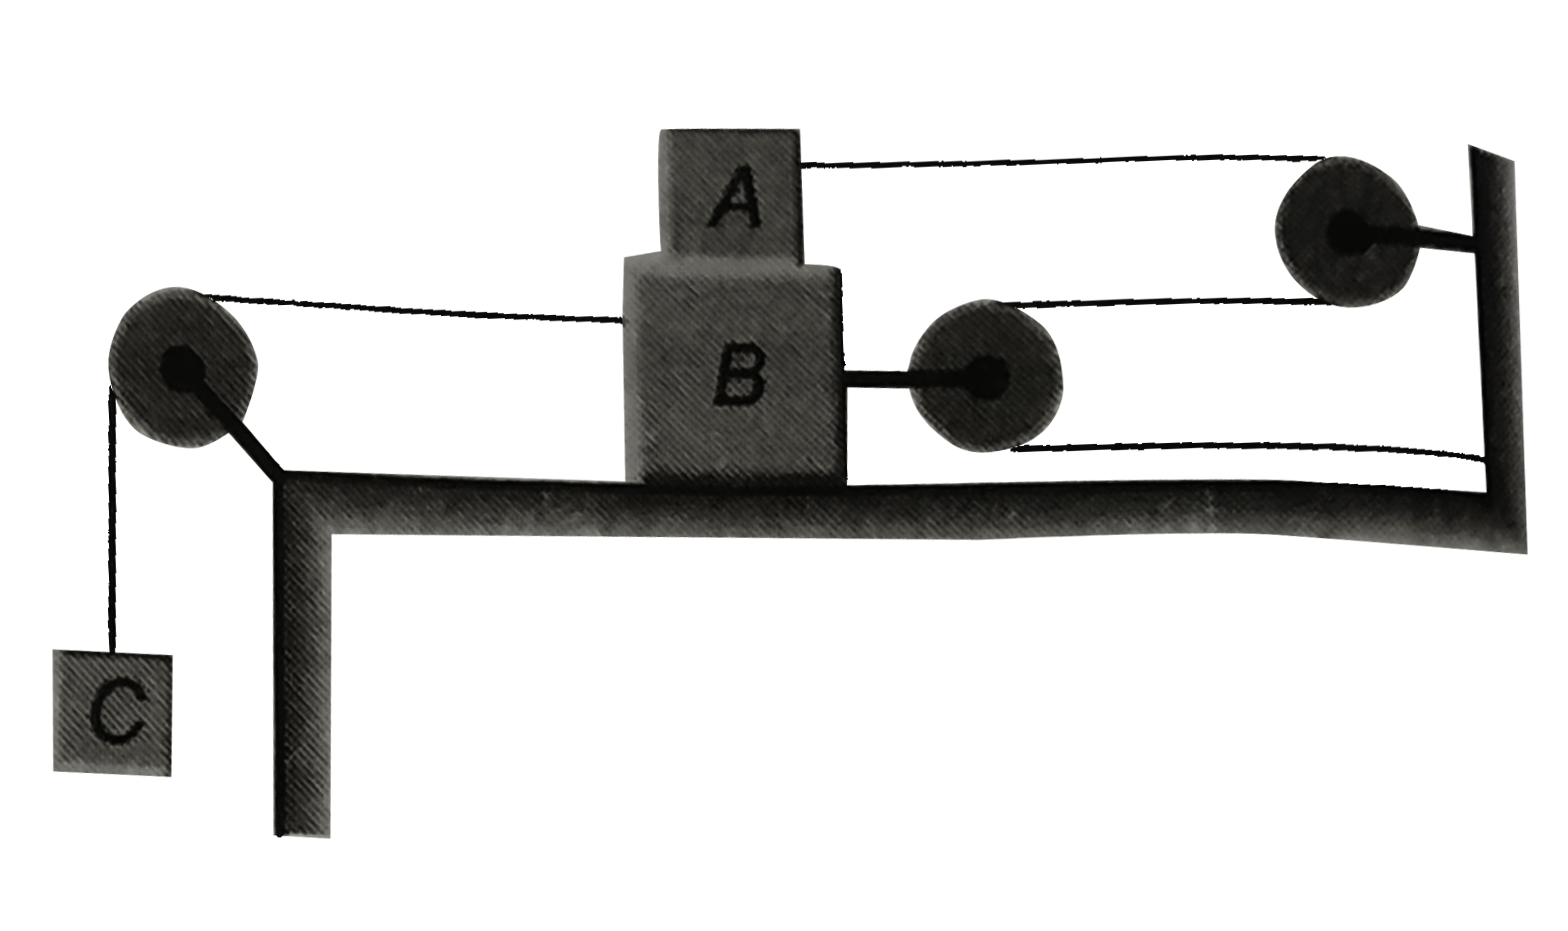 What is the largest mass of C in kg that can be suspended without moving blocks A and B ? The static coefficent of friction for all plane surface of contact is 0.3 Mass of block A is 50 kg and block B is 70 kg. Neglect friction in the pulleys.